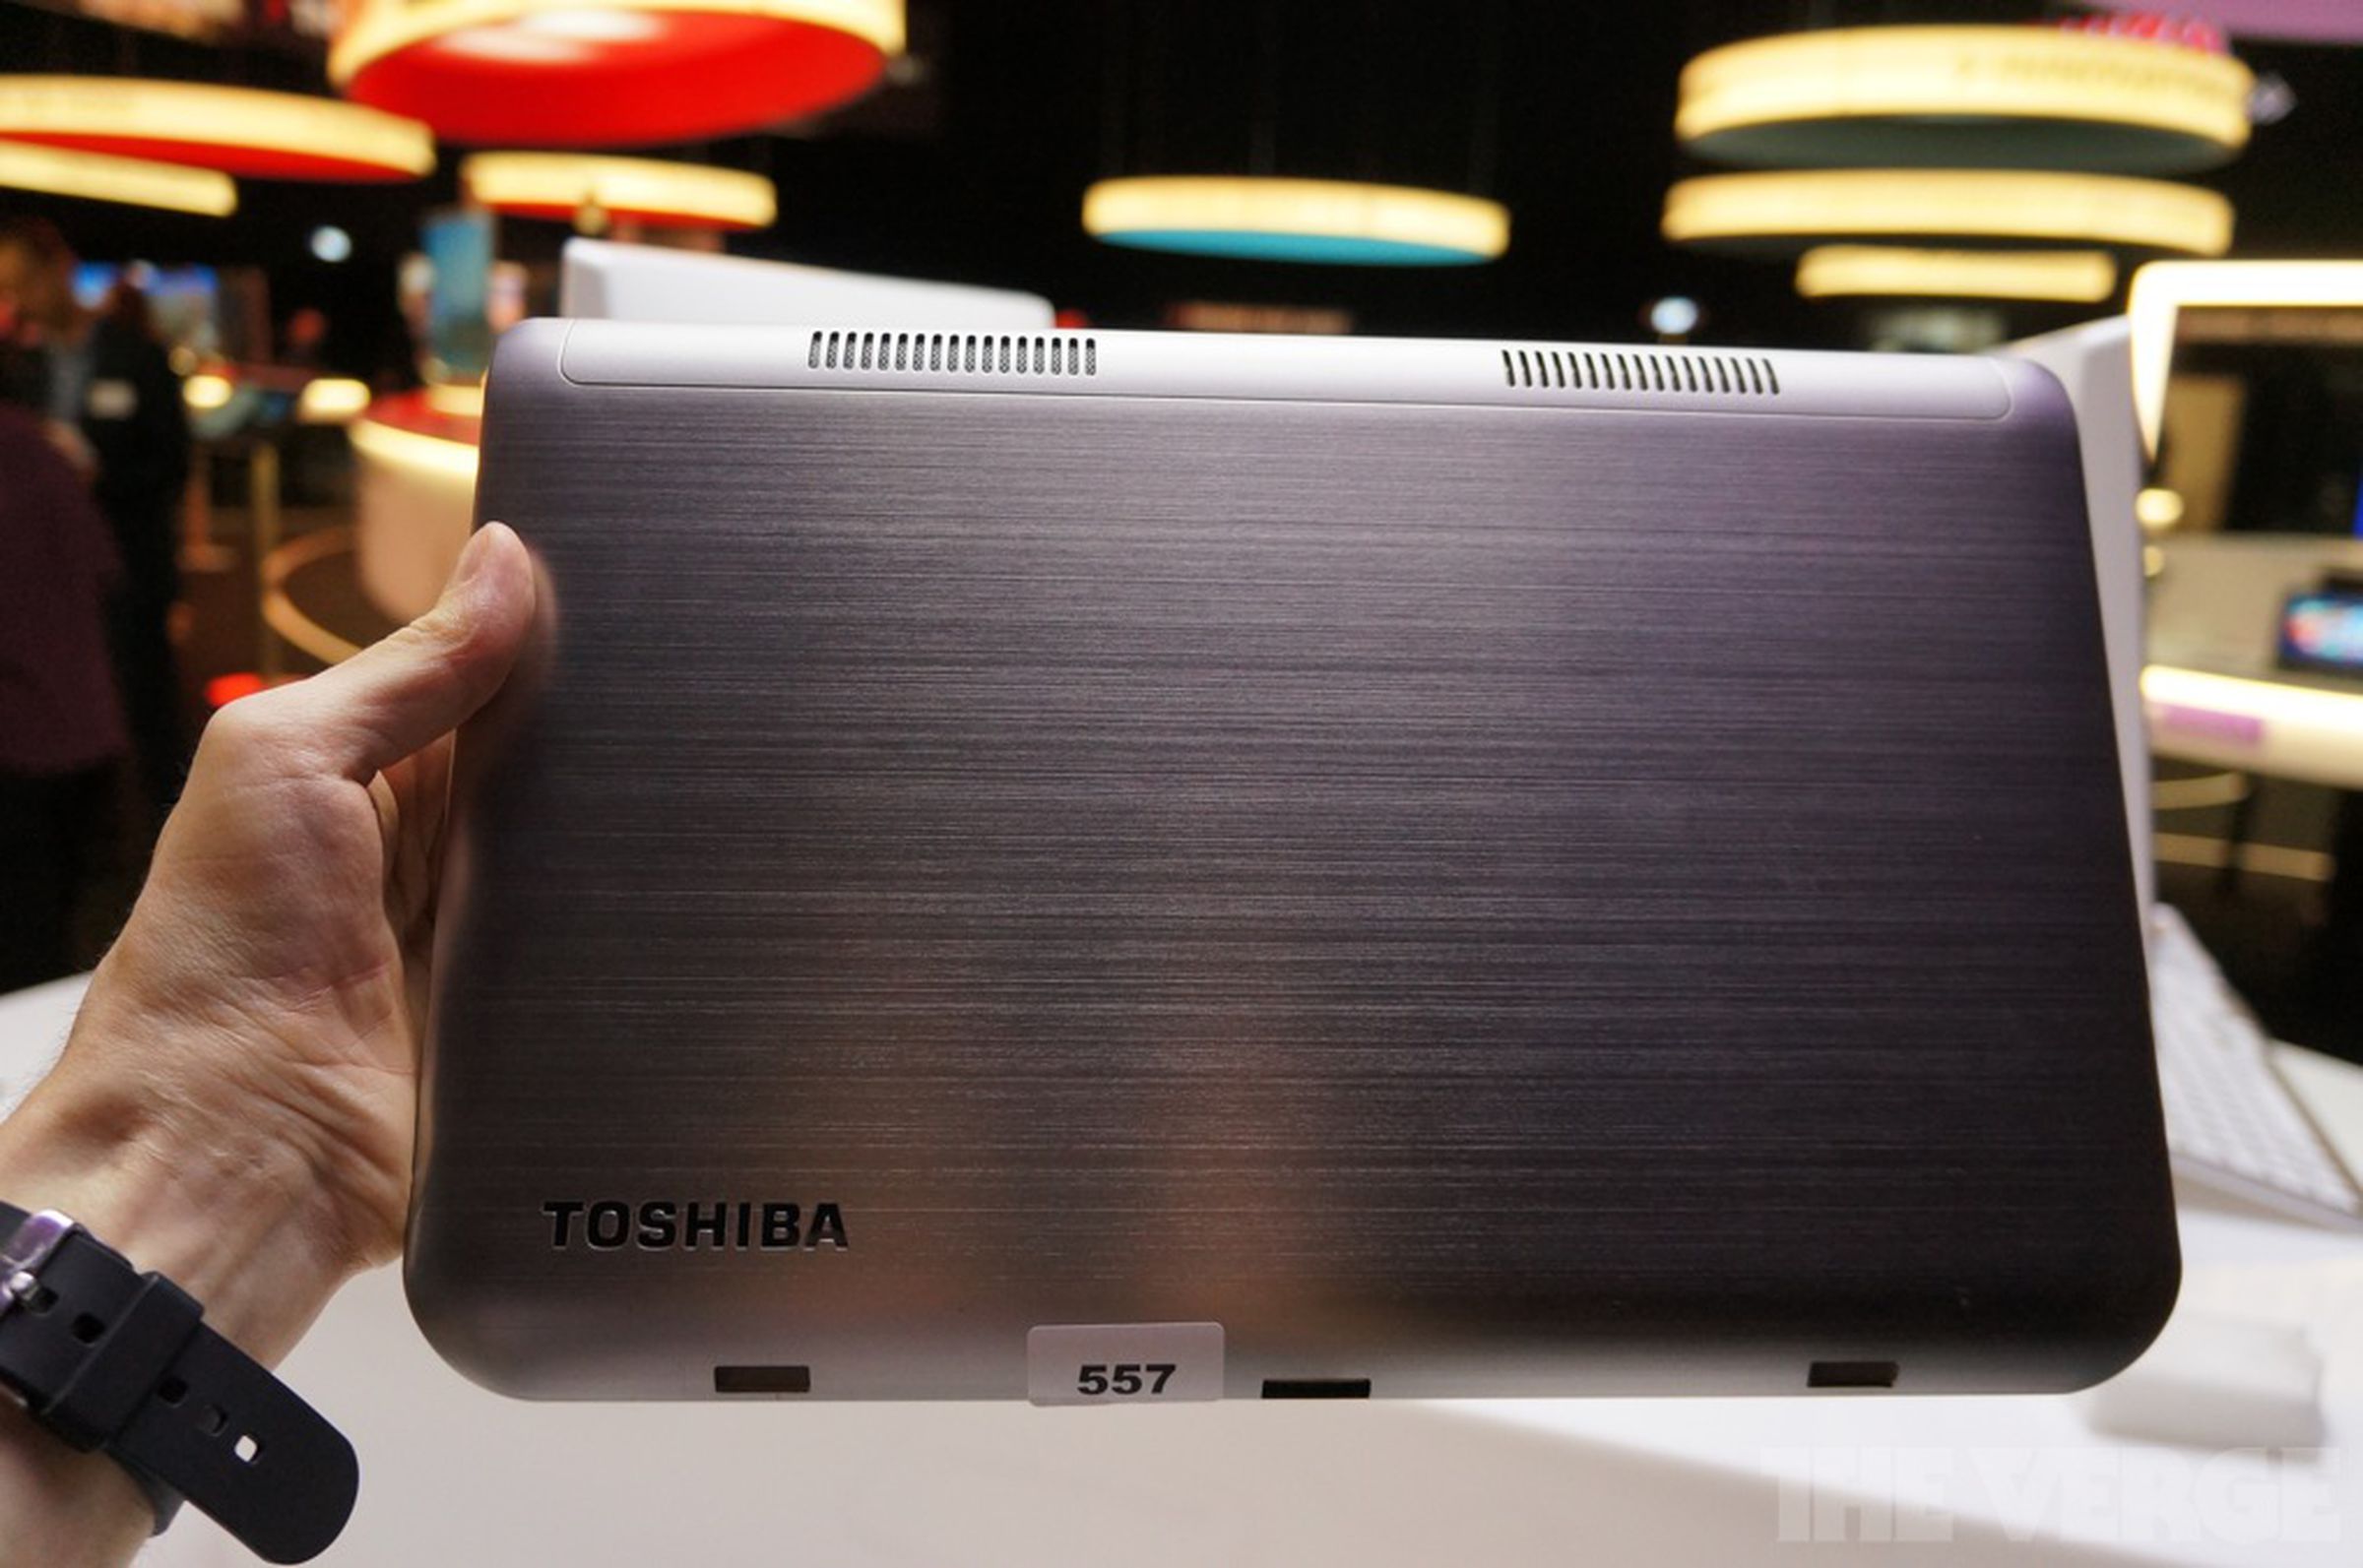 Toshiba Click hands-on gallery